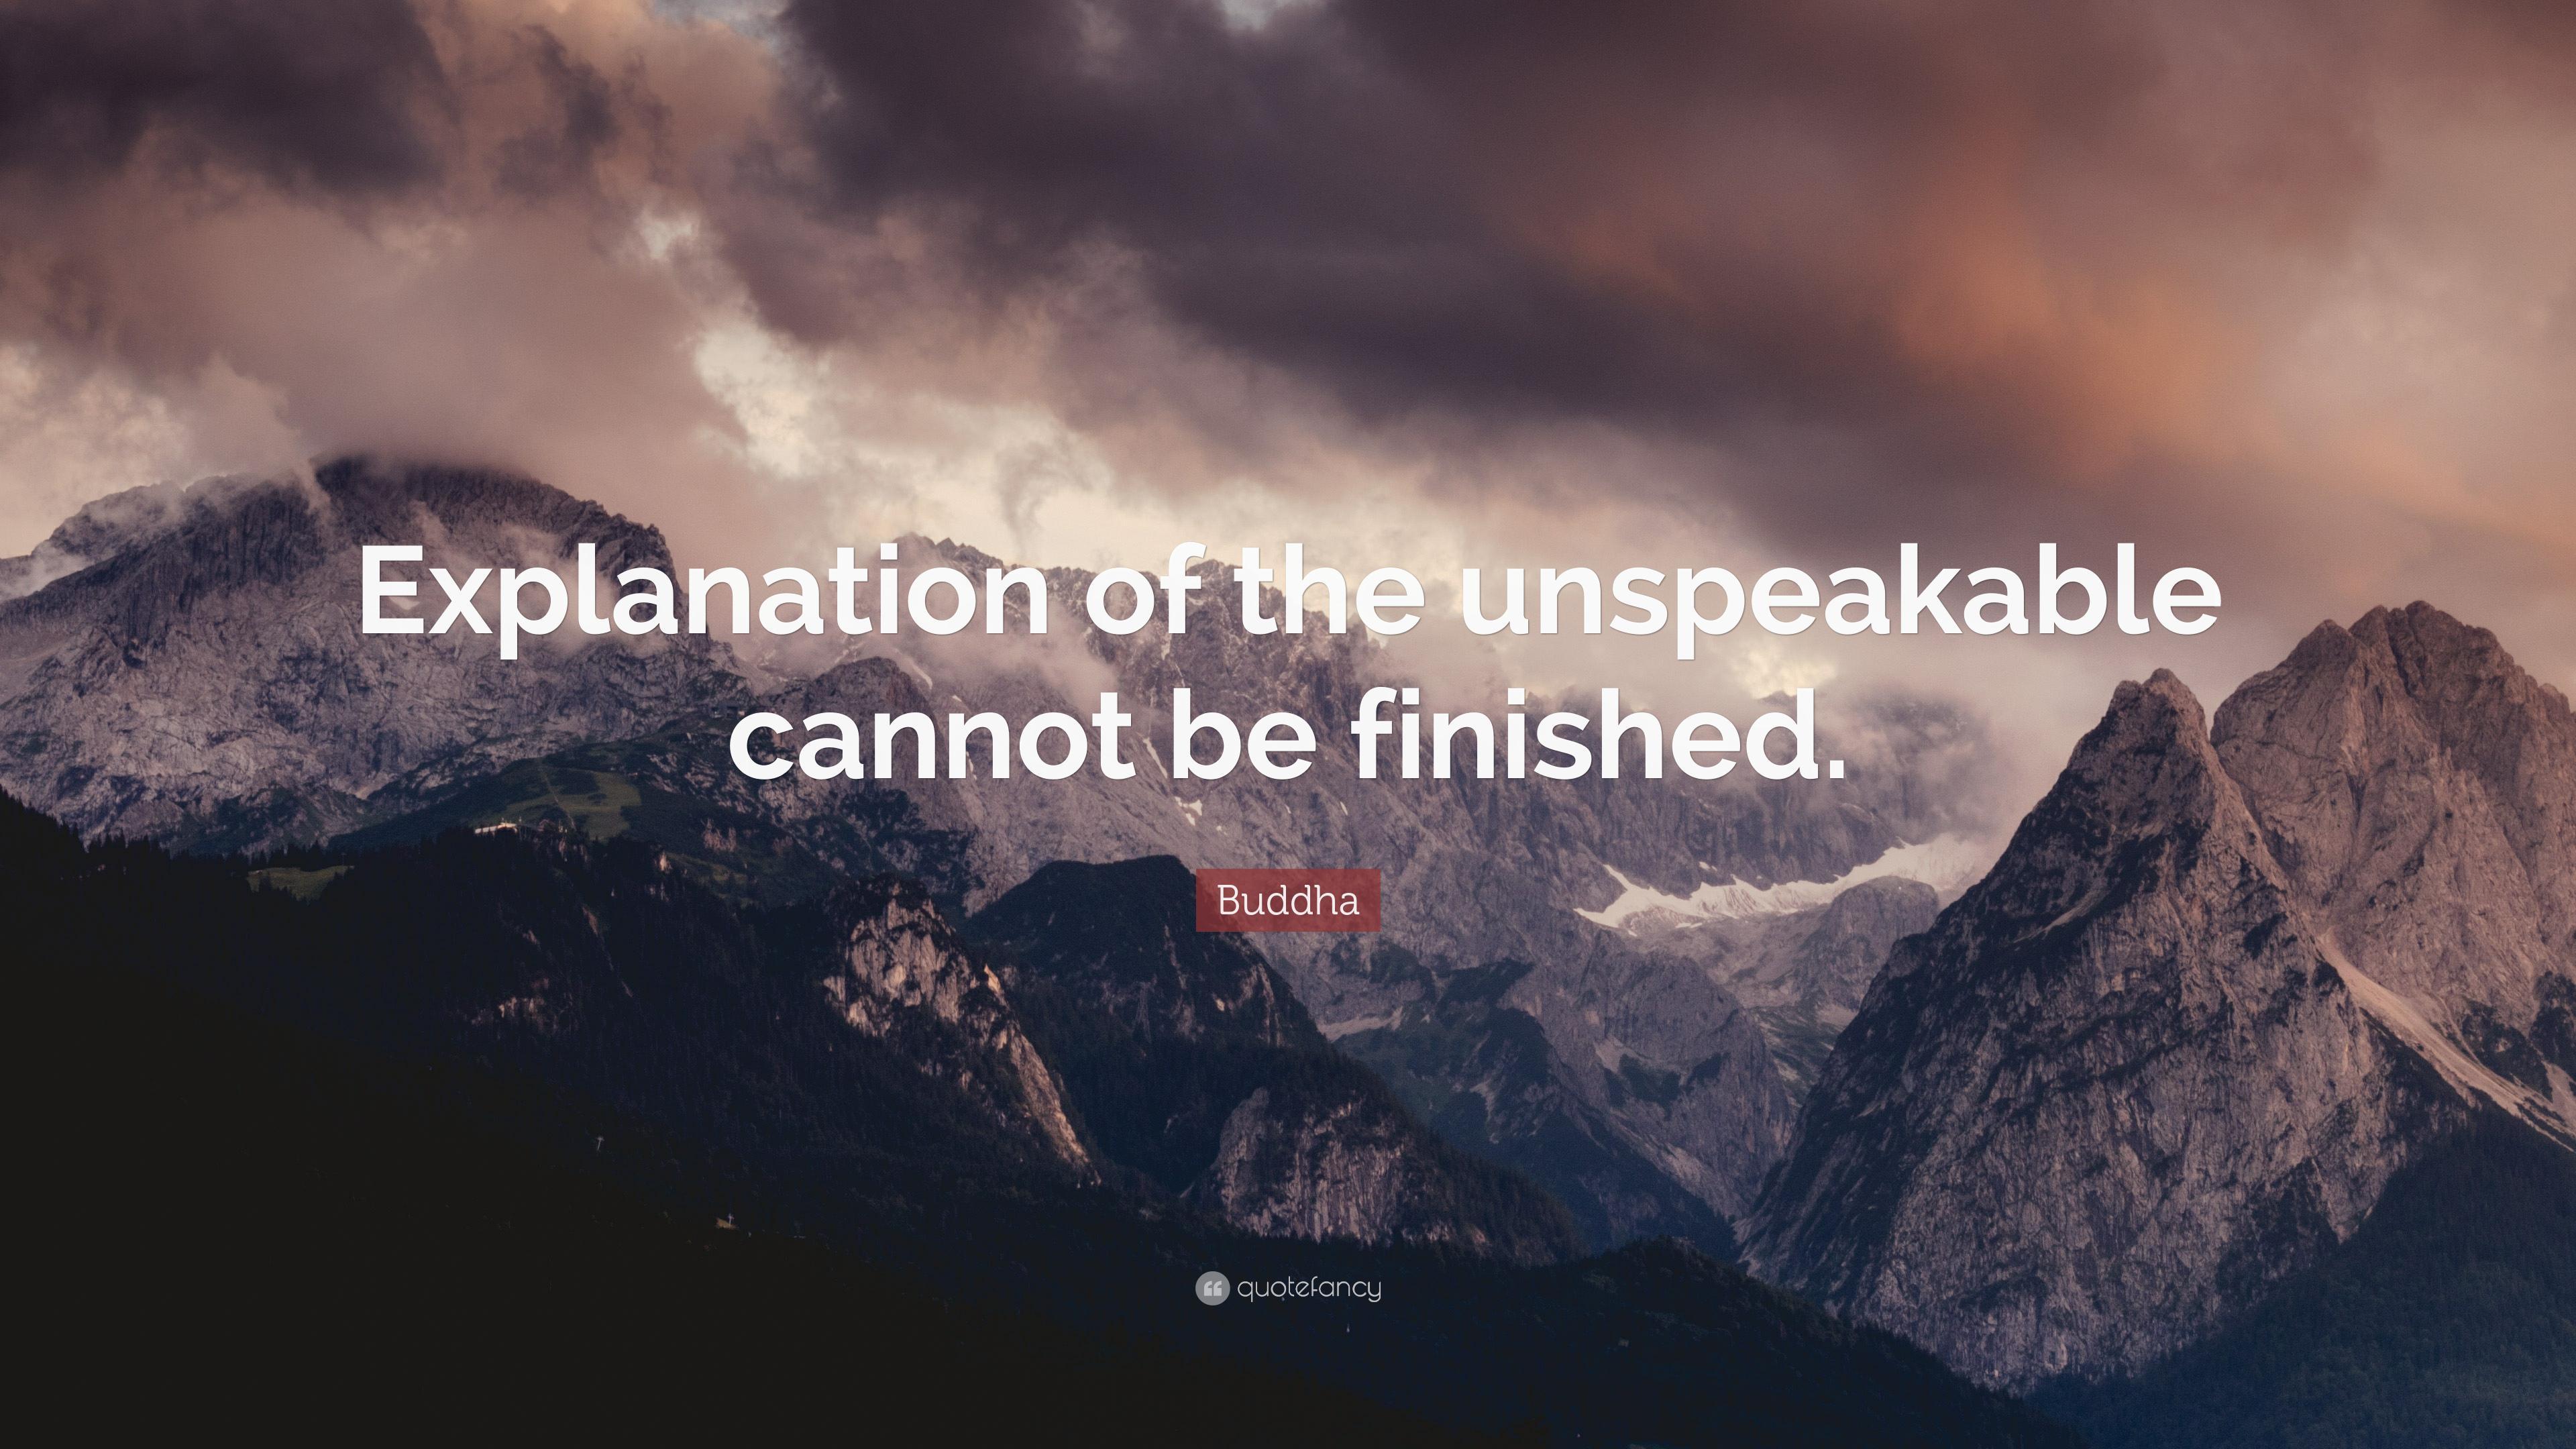 Buddha Quote: “Explanation of the unspeakable cannot be finished